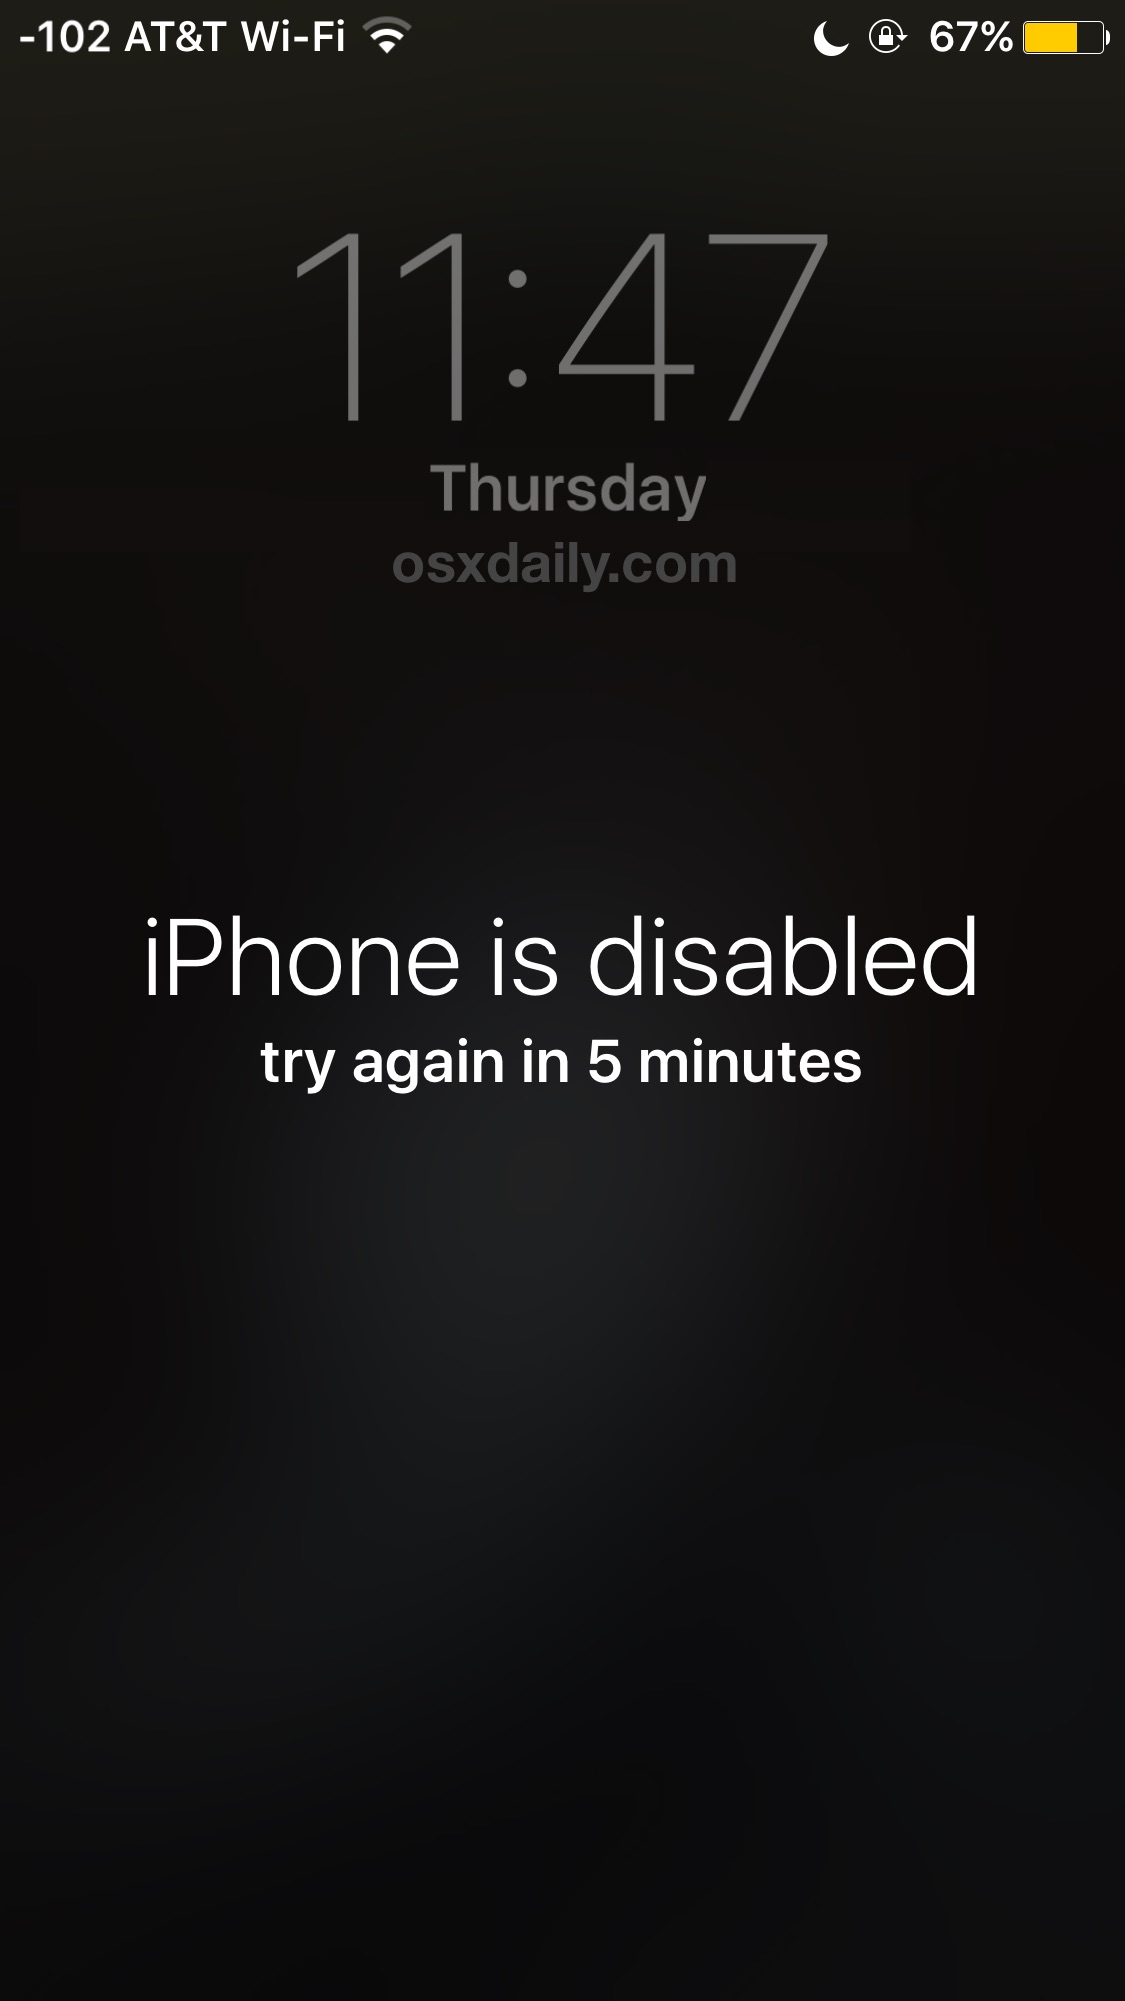 iphone is disabled management message